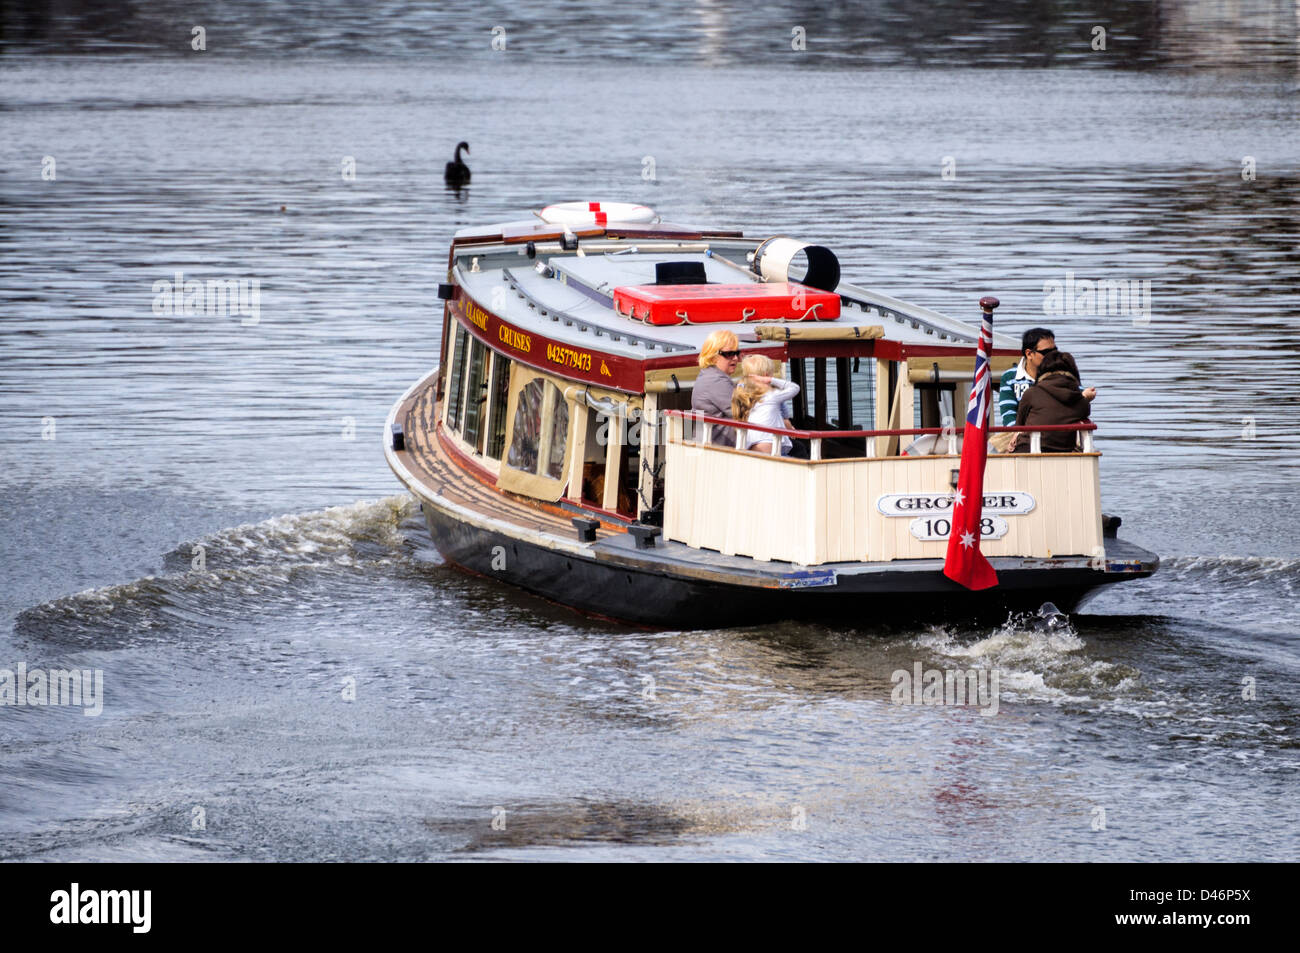 A river boat carries its passengers into the evening. Stock Photo